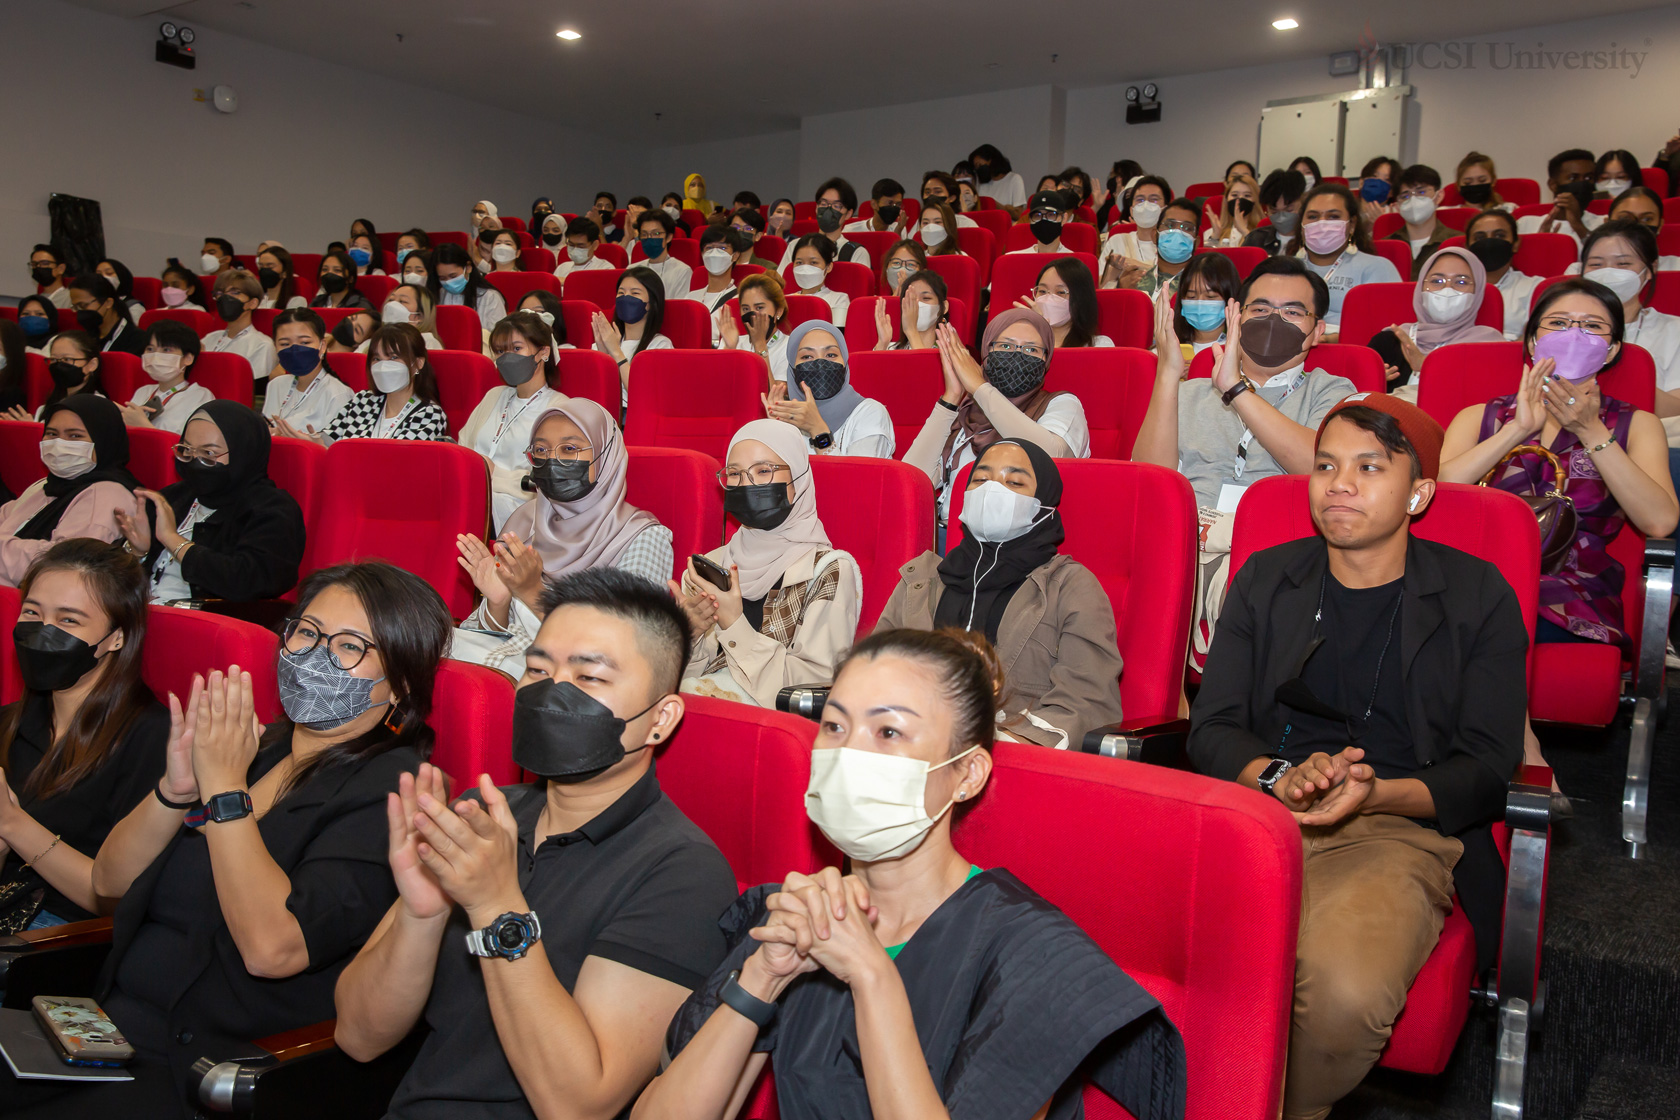 Audience clapping hands in UCSI University auditorium hall